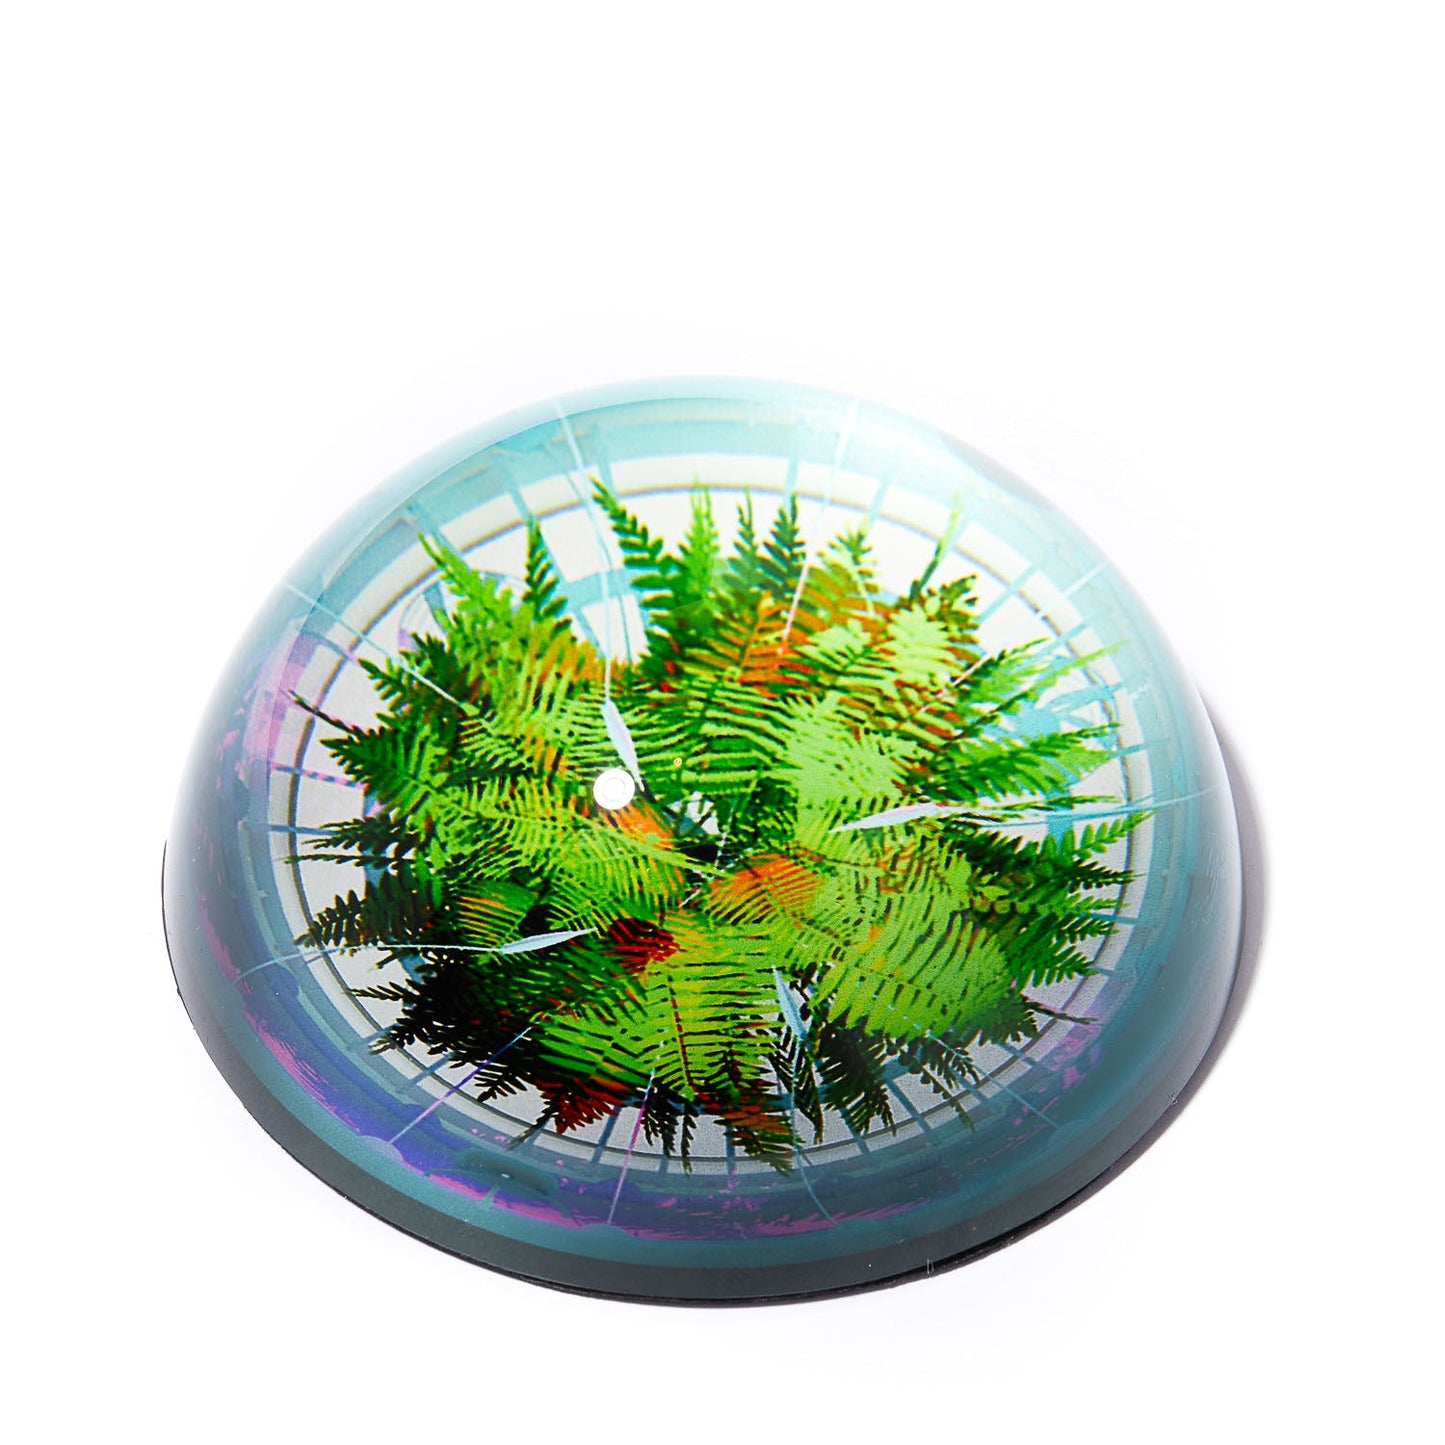 THE OBSERVATORY FERN PAPERWEIGHT